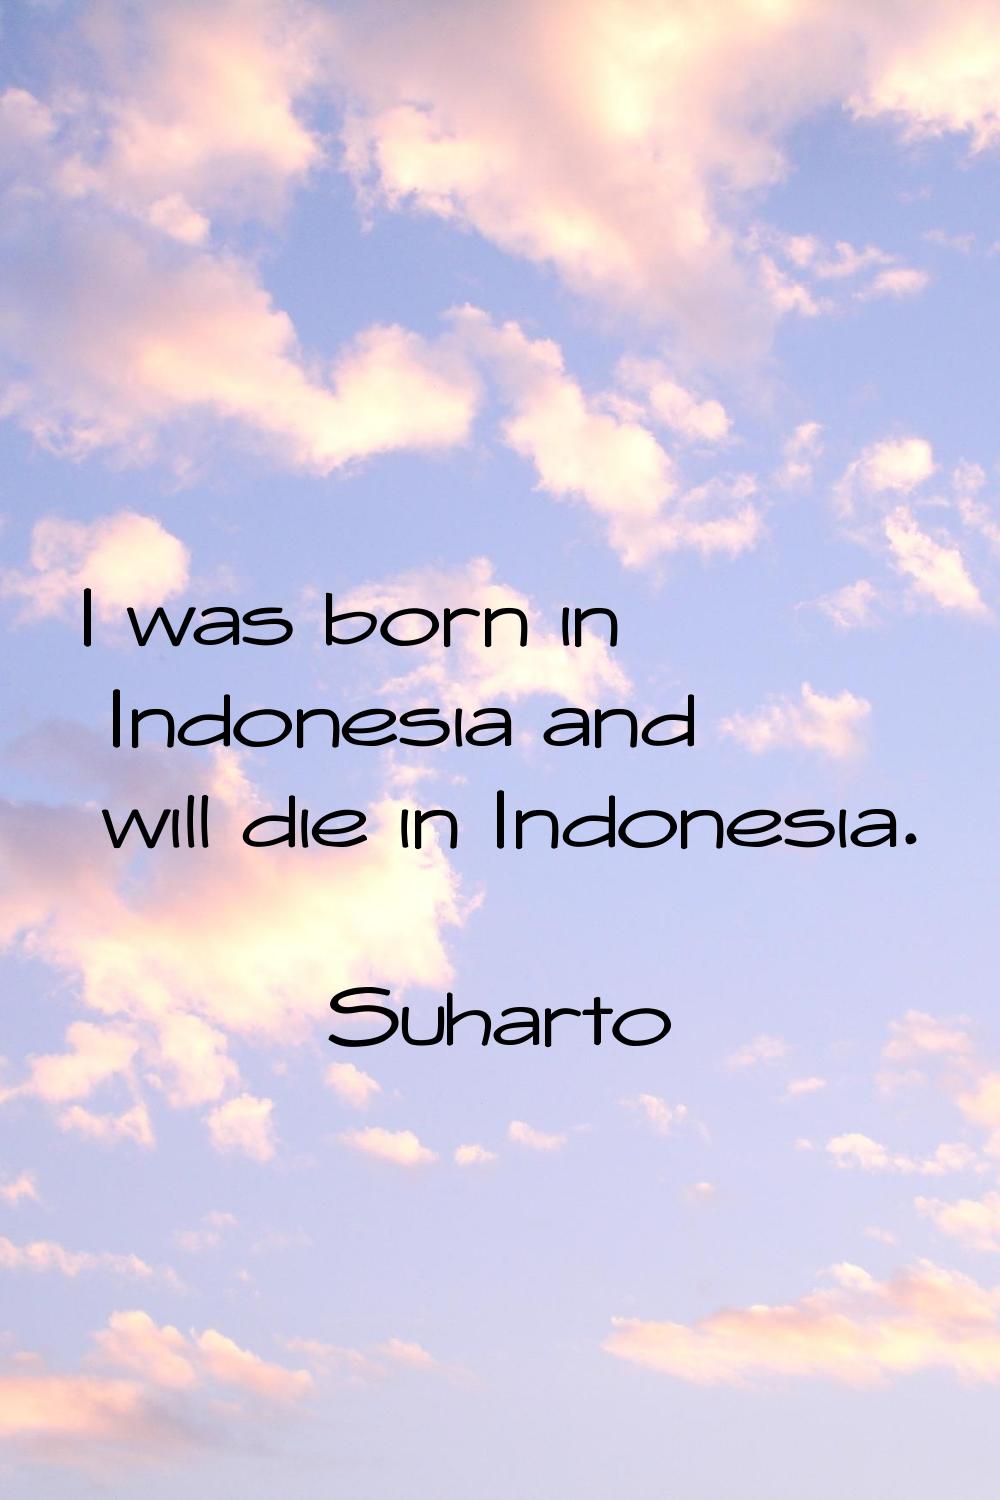 I was born in Indonesia and will die in Indonesia.